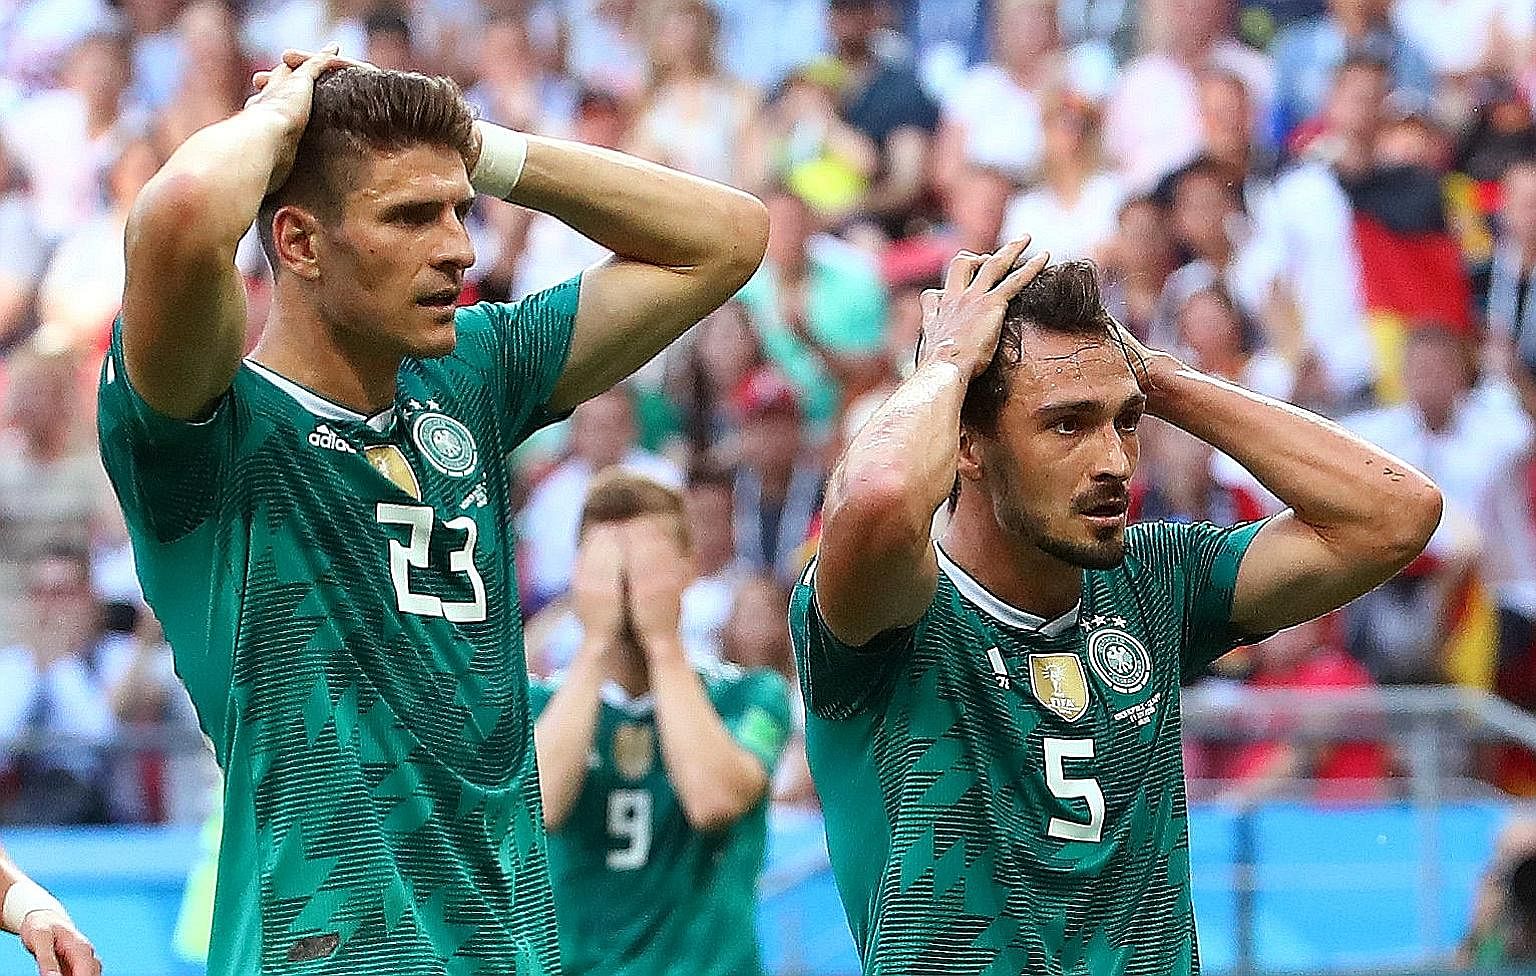 Defending champions Germany crashed out of the World Cup after a shock 0-2 Group F loss to South Korea yesterday. This is the first time the Germans have been eliminated in the first round since 1938. Sweden defeated Mexico 3-0 in the other match to 